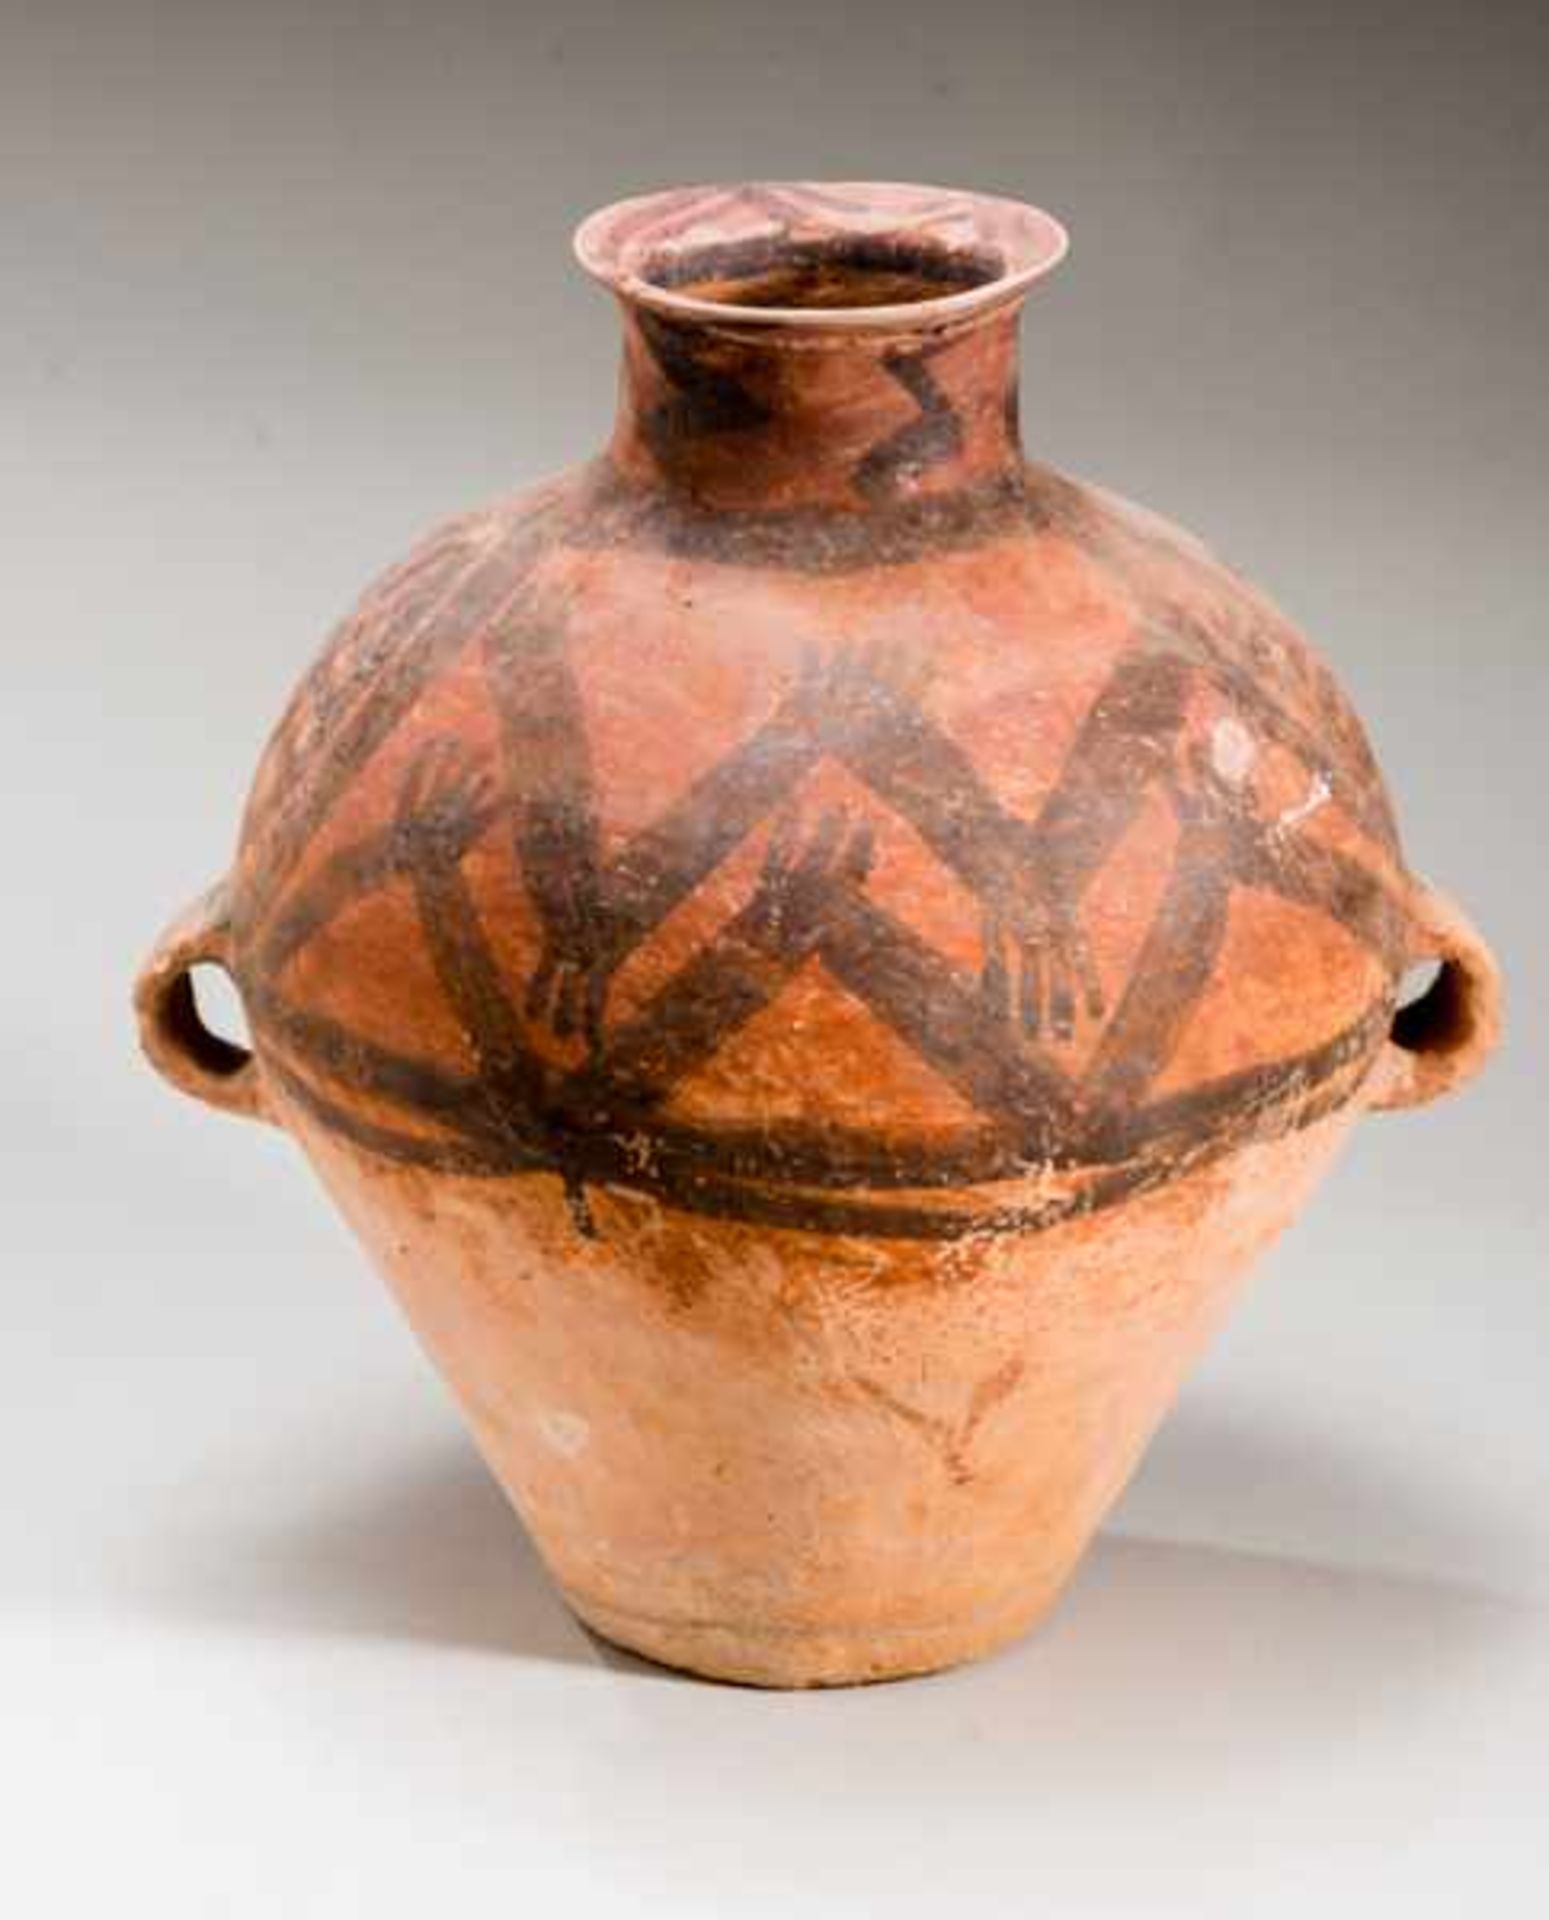 LARGE VESSEL Terracotta with the original painting. China, Yangshao culture (3000-2000BCE) Majiayao, - Image 4 of 6